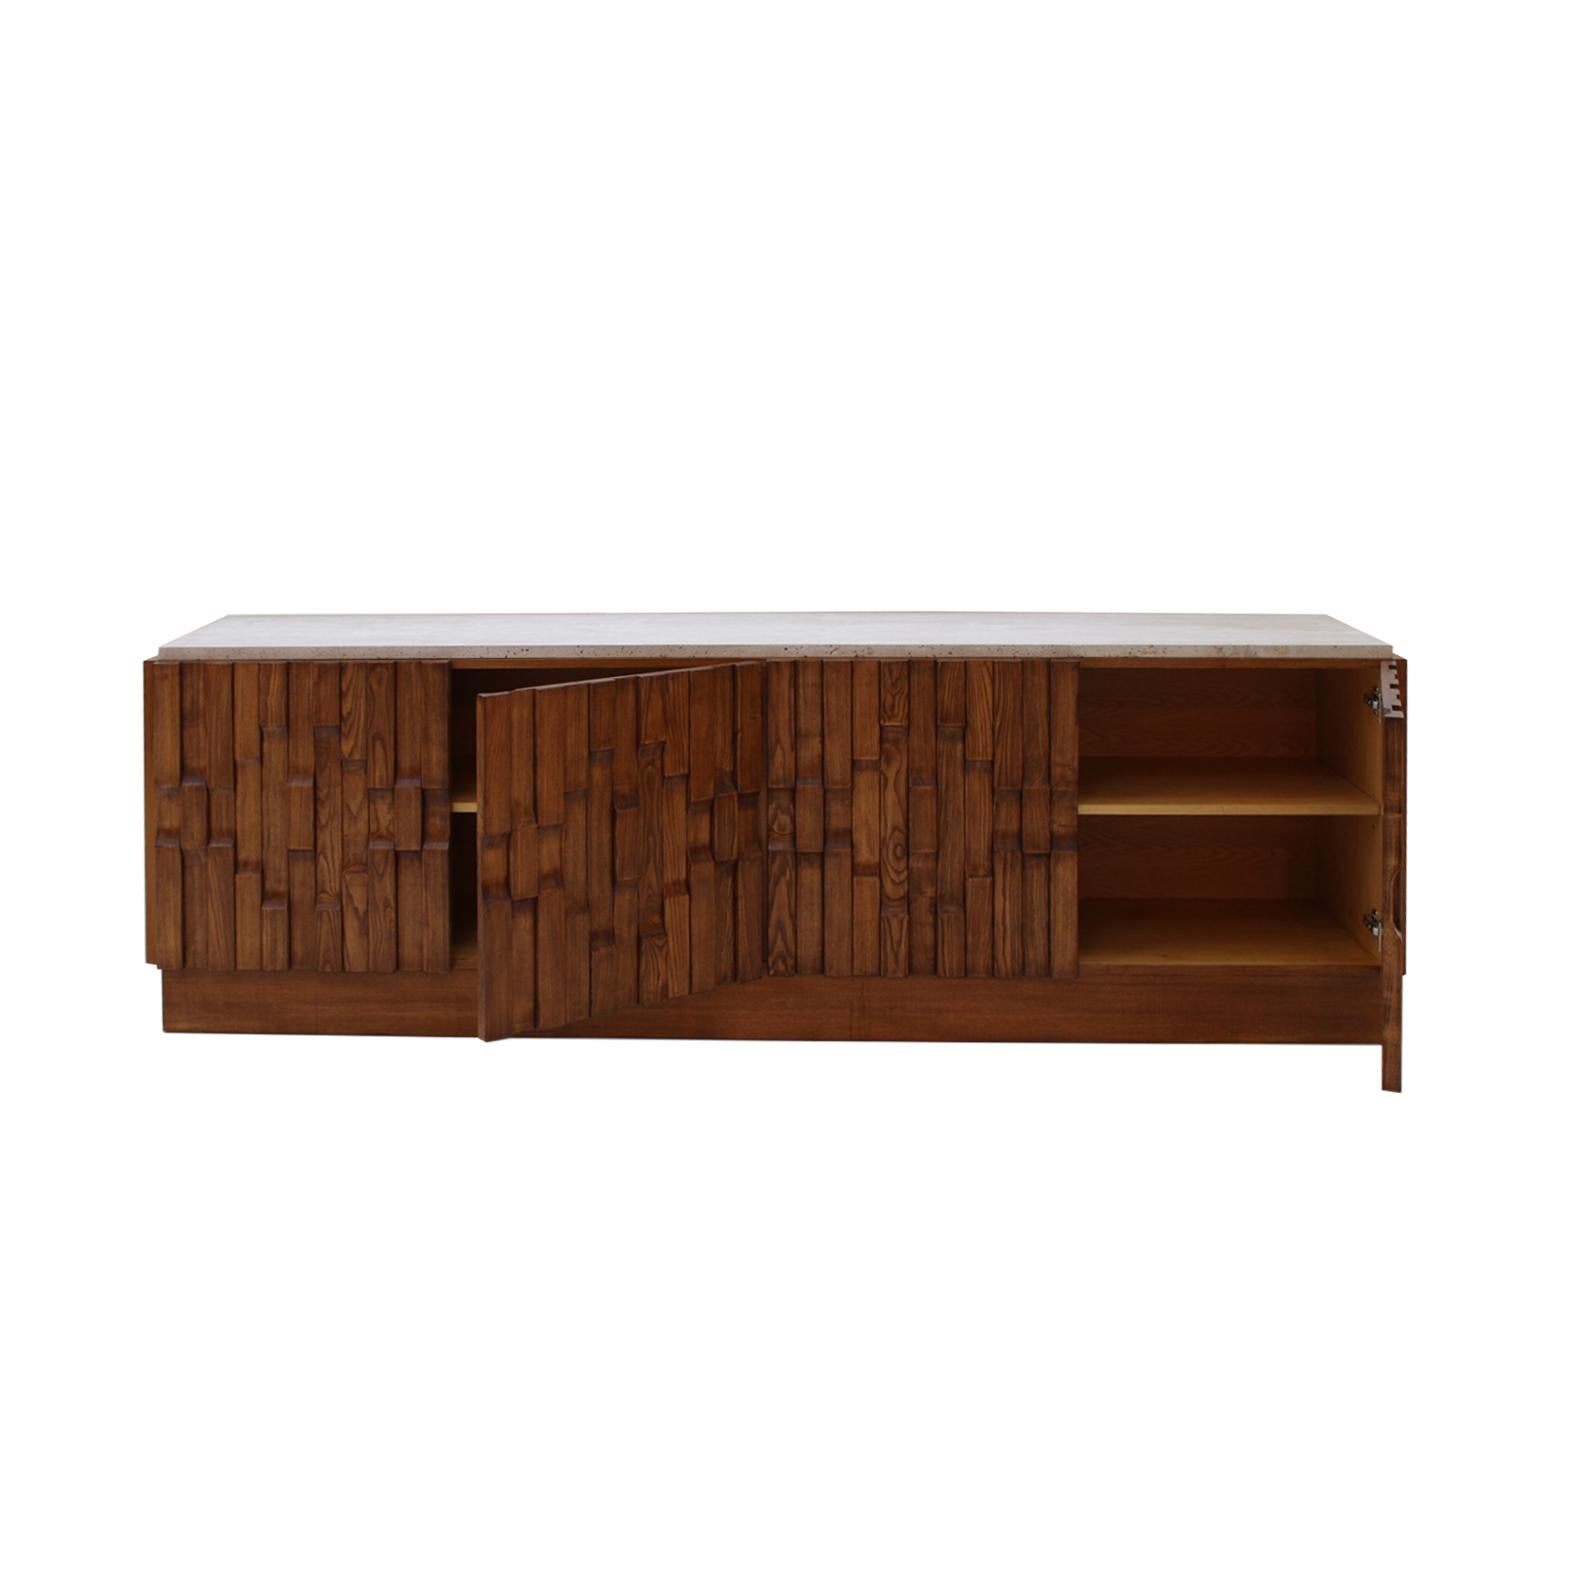 Italian Oak Wood Sideboard with Travertine Marble Top and Hand Carved Patterns In Good Condition For Sale In Madrid, ES